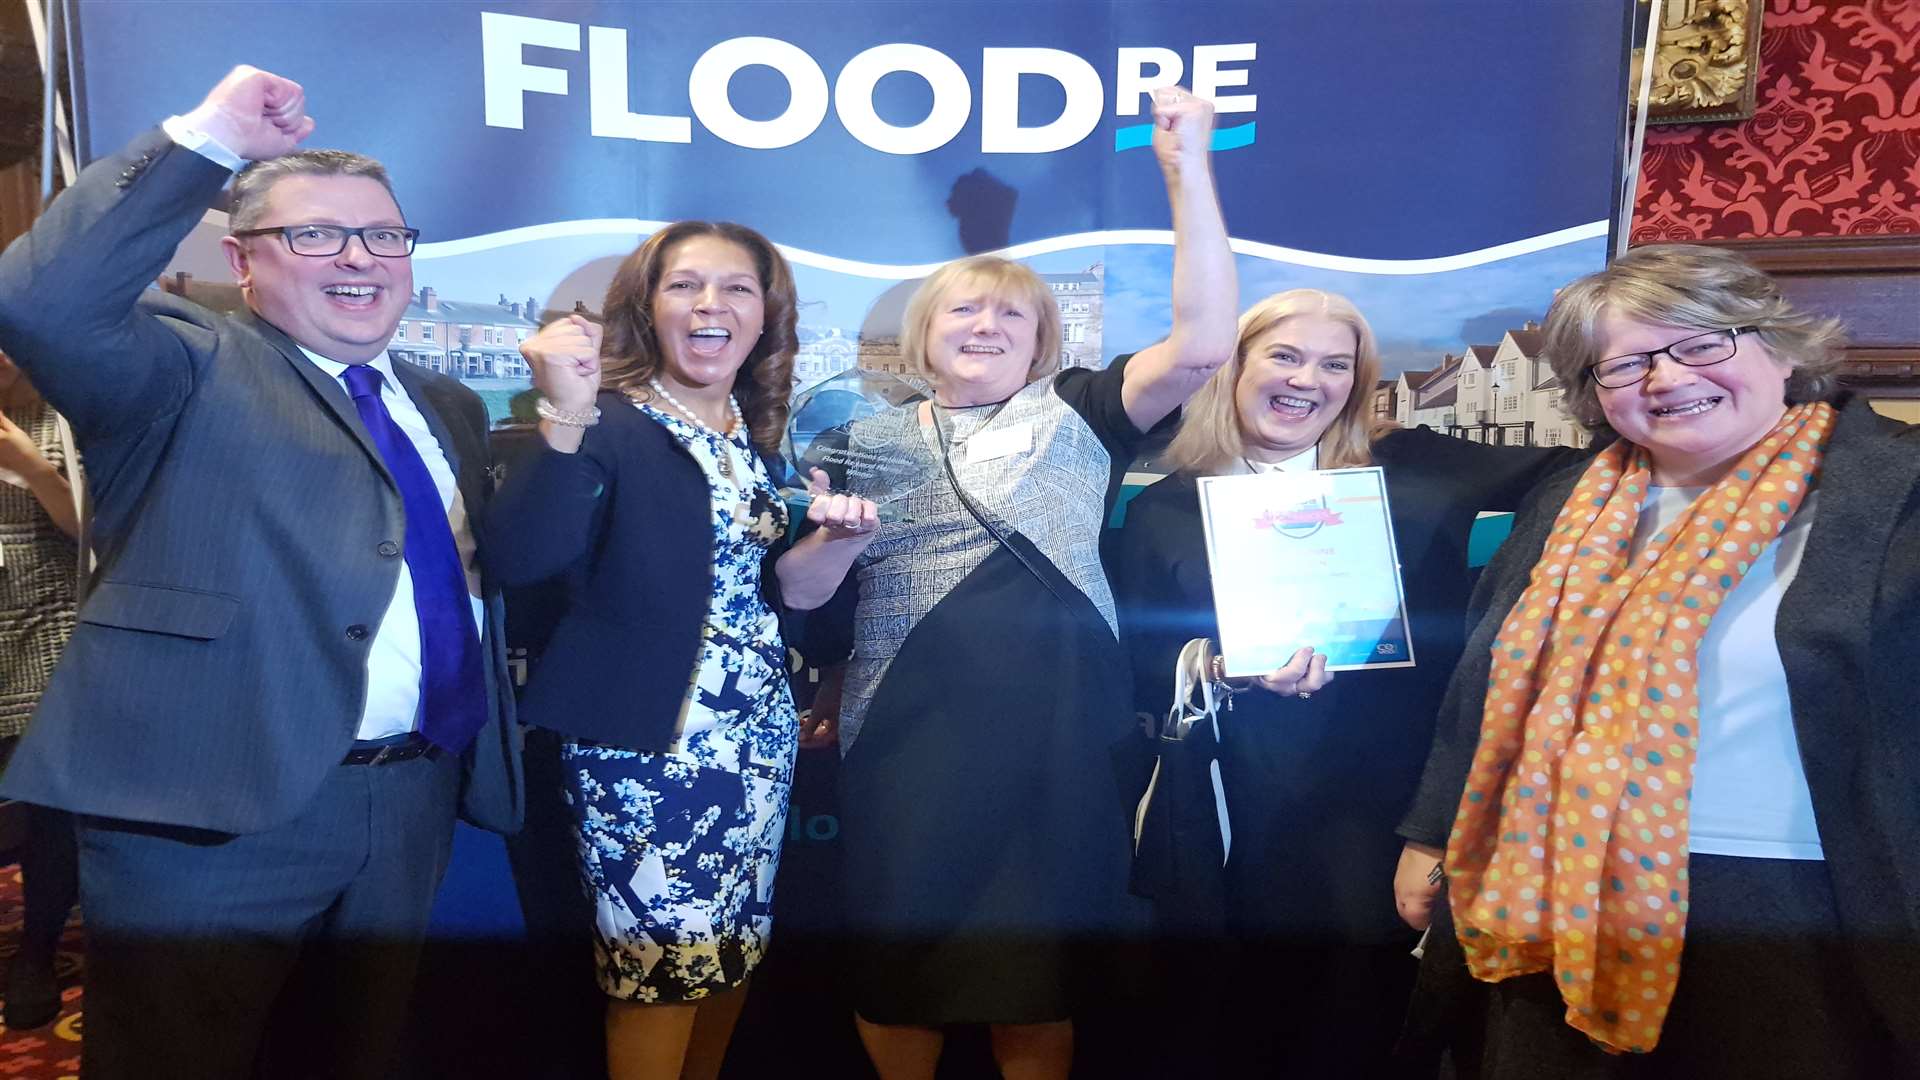 Andy Bord, CEO of FloodRe, Helen Grant MP, Geraldine Brown, Angela Gent – Yalding Parish Council Clerk, Therese Coffey MP – Parliamentary Under Secretary of State at DEFRA